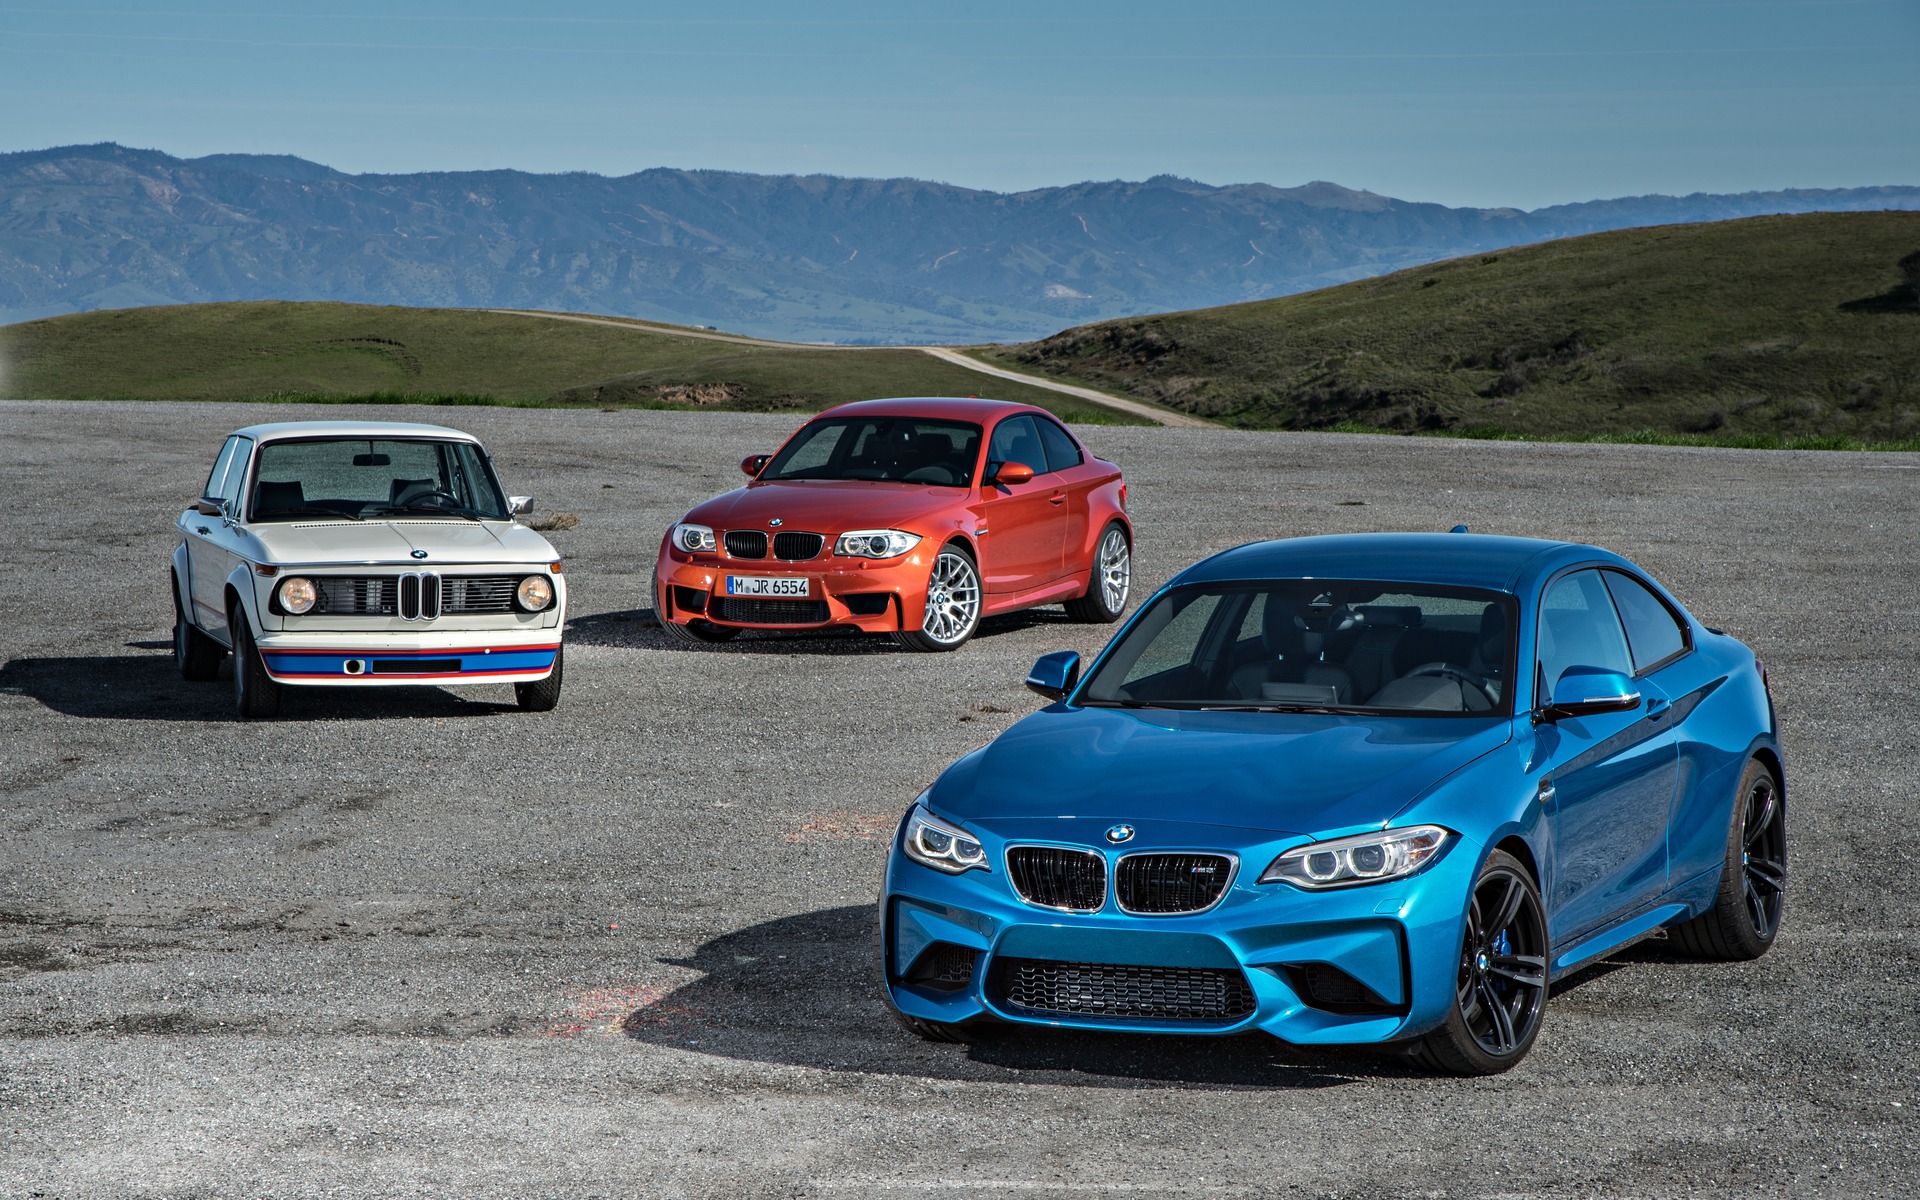 Front left to right: BMW 2002 Turbo, BMW 1 Series M Coupé and BMW M2.